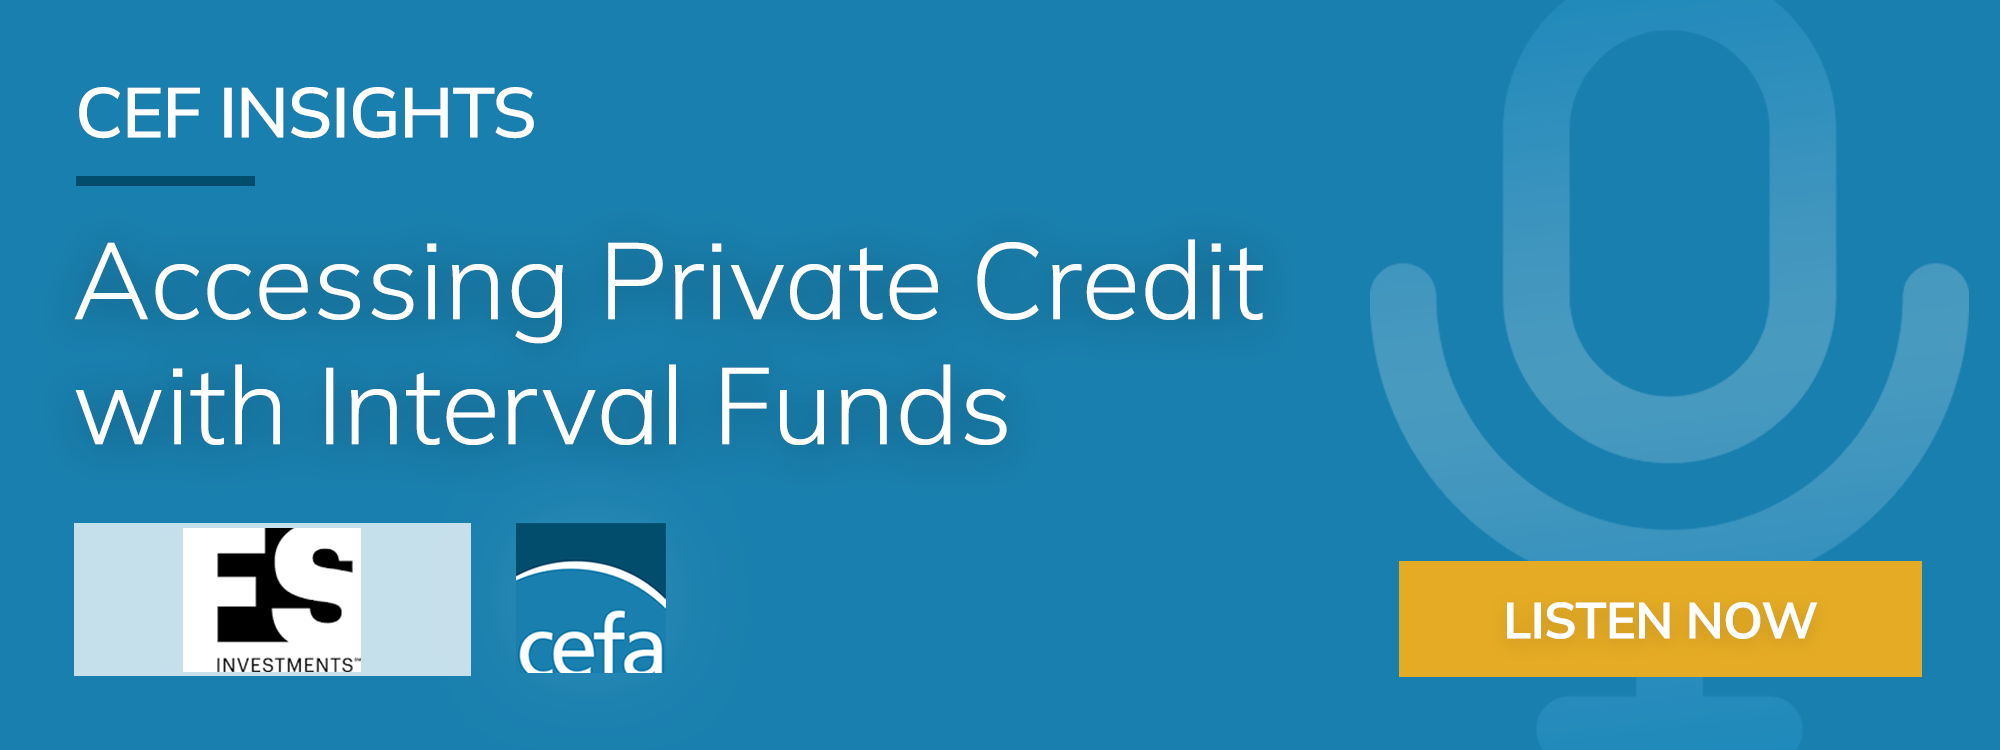 Accessing Private Credit with Interval Funds Podcast